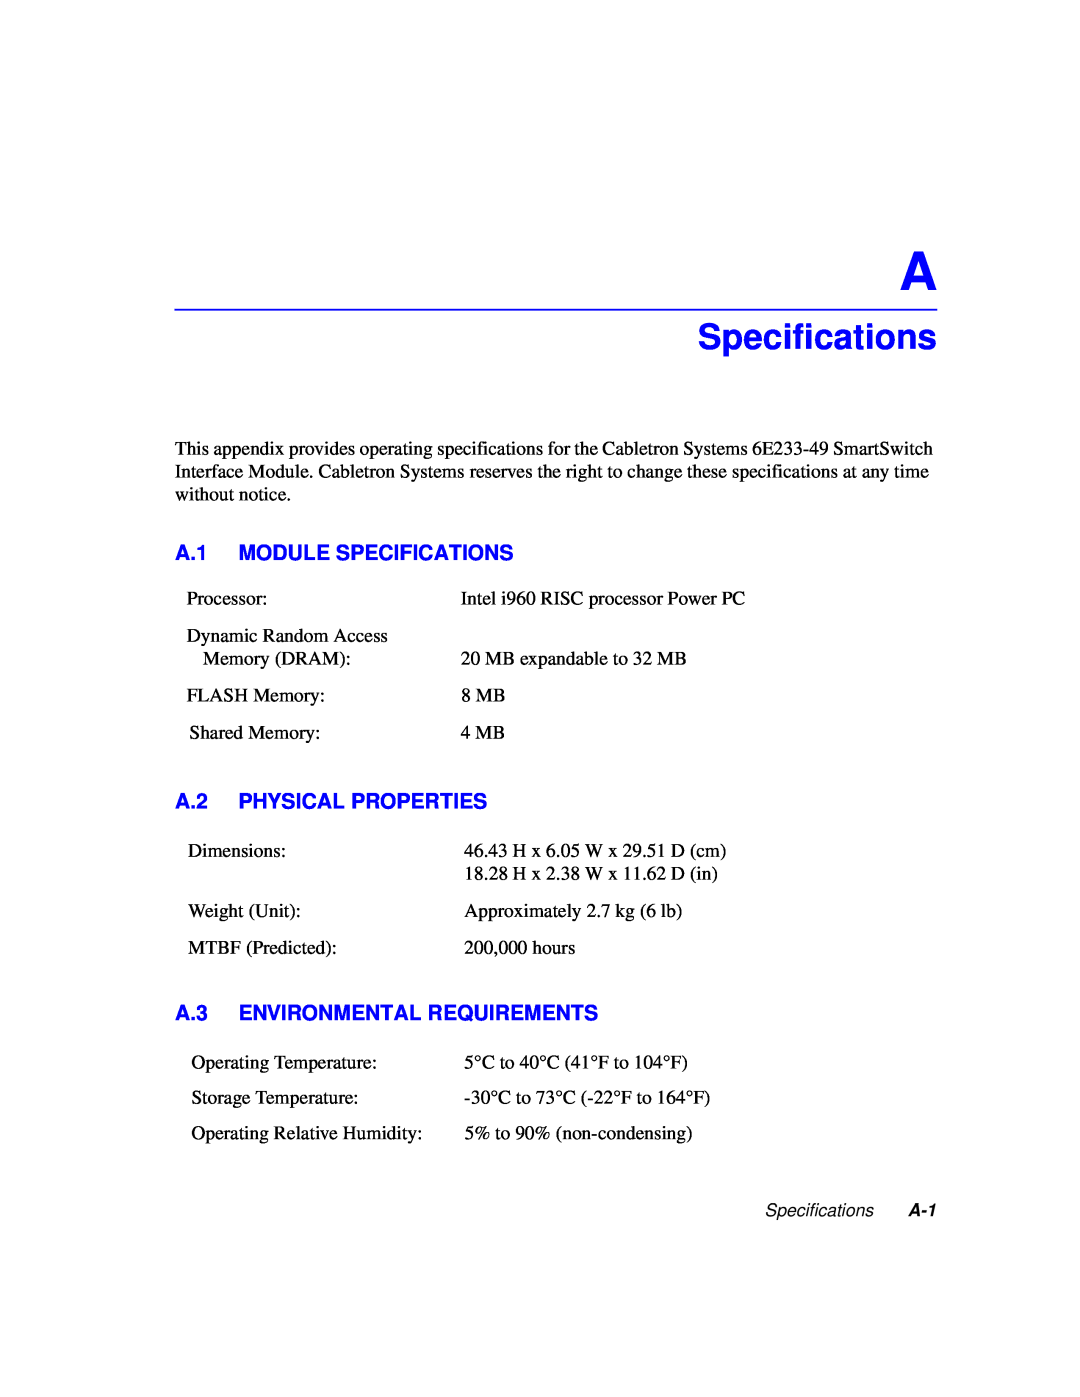 Cabletron Systems 6000 Specifications, A.1 MODULE SPECIFICATIONS, A.2 PHYSICAL PROPERTIES, A.3 ENVIRONMENTAL REQUIREMENTS 